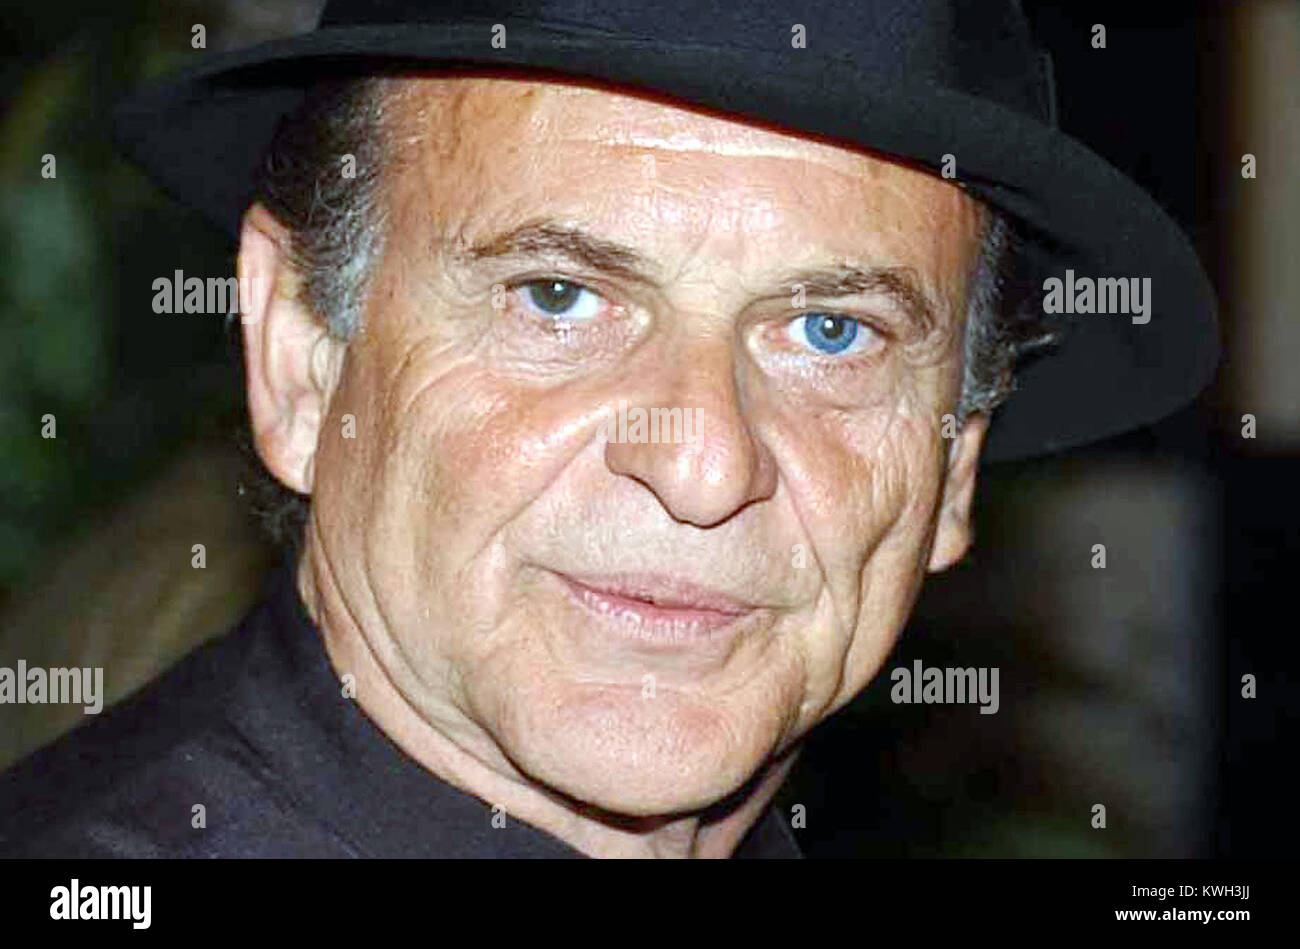 MIAMI, FL - JULY 28: (DAILY UK) Oscar winning star Joe Pesci is suing for $3m after piling on 30lbs to play a mafia mobster - only to be dumped from the role. The Hollywood star has filed a lawsuit against the producers of a new film which stars John Travolta as mob boss John Gotti Jr. Pesci claims he was offered the part of Angelo Ruggiero, a close friend and enforce for Gotti Jr, and agreed a  $3m deal. In preparation for the role he gained almost 30lbs to help play Ruggiero who was well known for his heavy and stocky build. But in legal papers filed in Los Angeles the 68-year-old actor clai Stock Photo